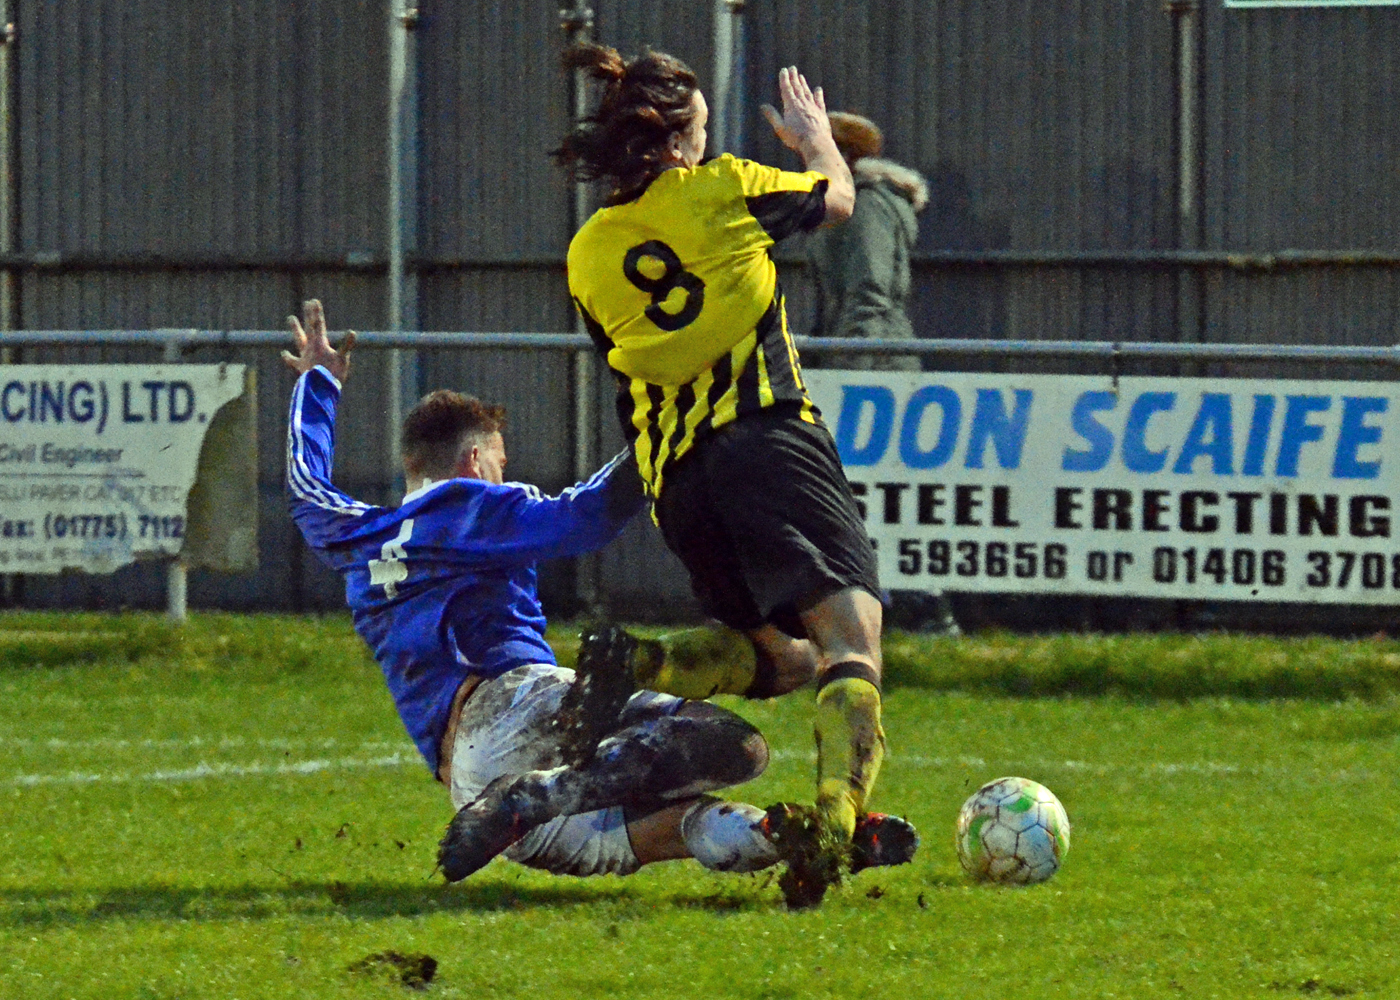 OUCH! This tackle has ruled Aaron Eyett out for eight weeks. Photo by JAKE WHITELEY